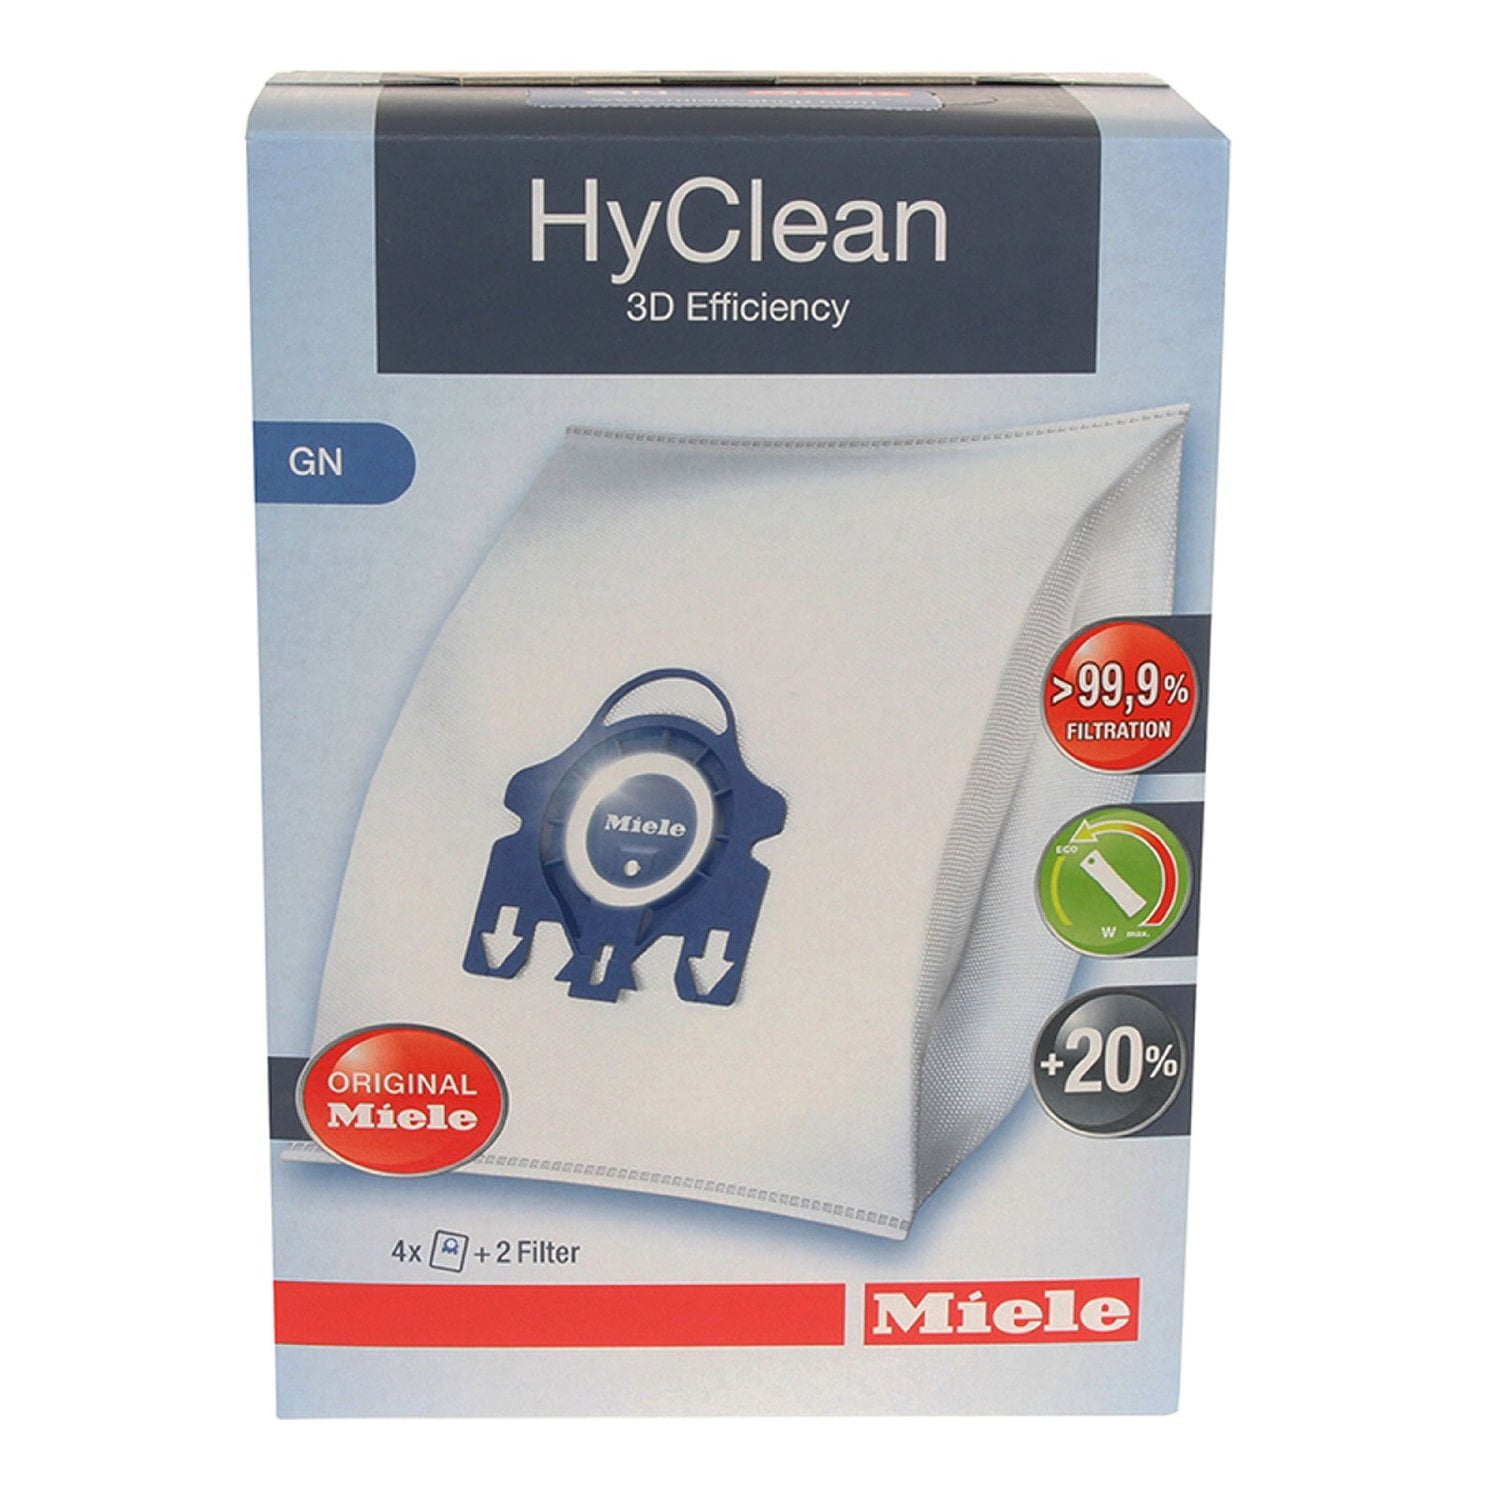 New Genuine Miele GN HyClean 3D Vacuum Cleaner Dust Bags Cat and Dog All Models 